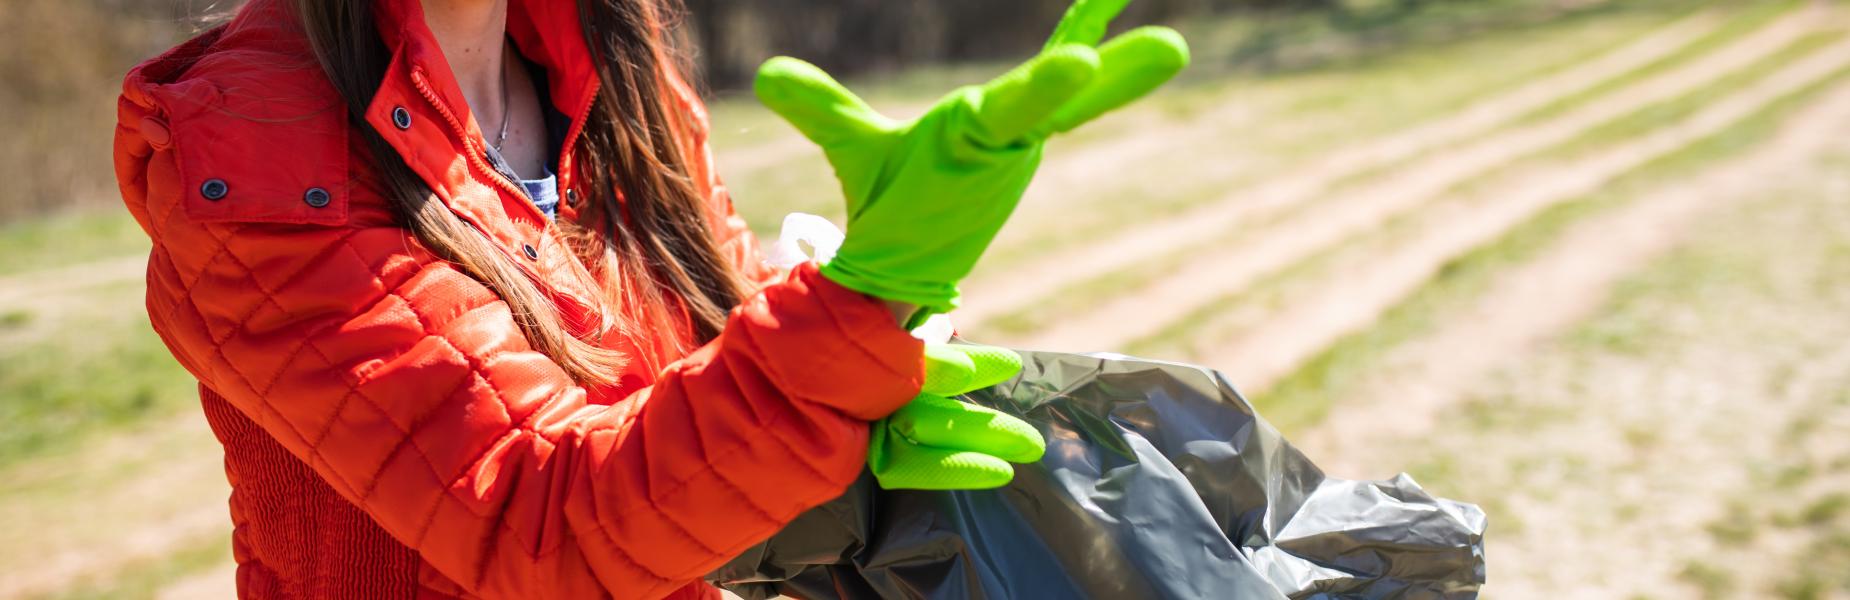 A woman wearing rubber gloves collecting rubbish